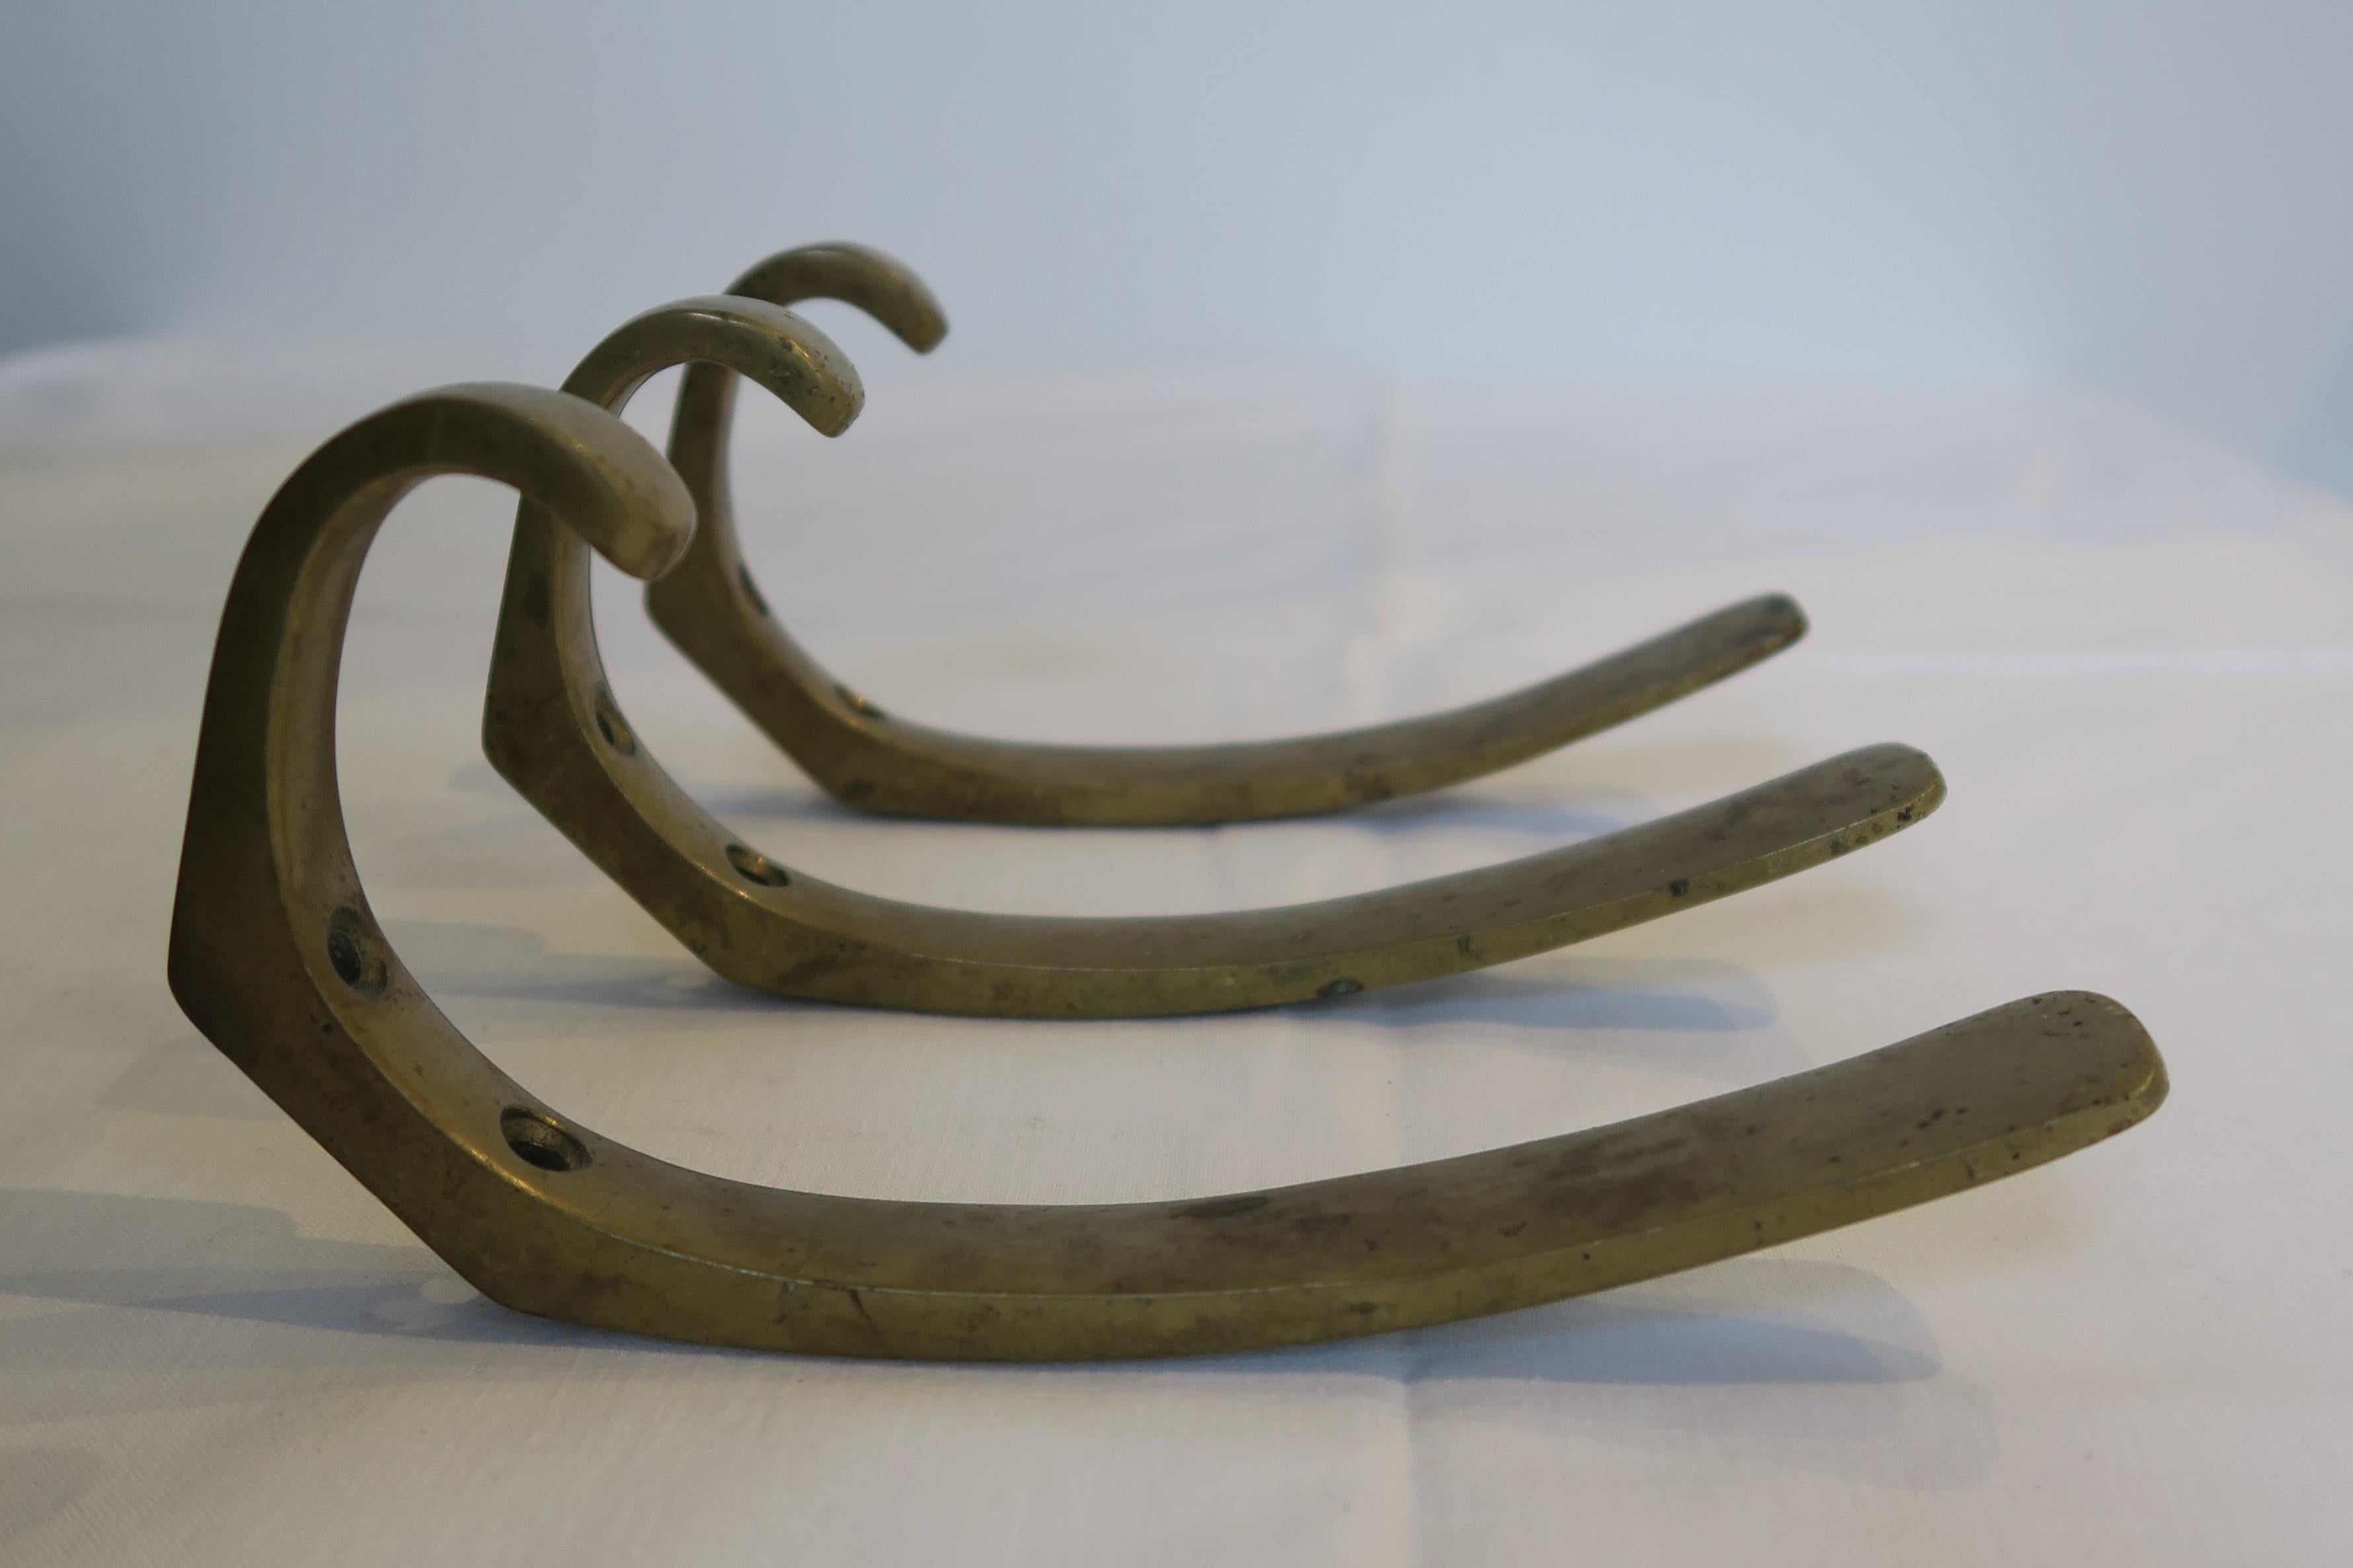 For sale is a set of 3 coat hooks in the style of either Walter Bosse, Herta Baller or Carl Auböck. They are made of massive brass and were produced in Austria in the 1950s. They are an iconic piece of Austrian design and craftsmanship. Each hook